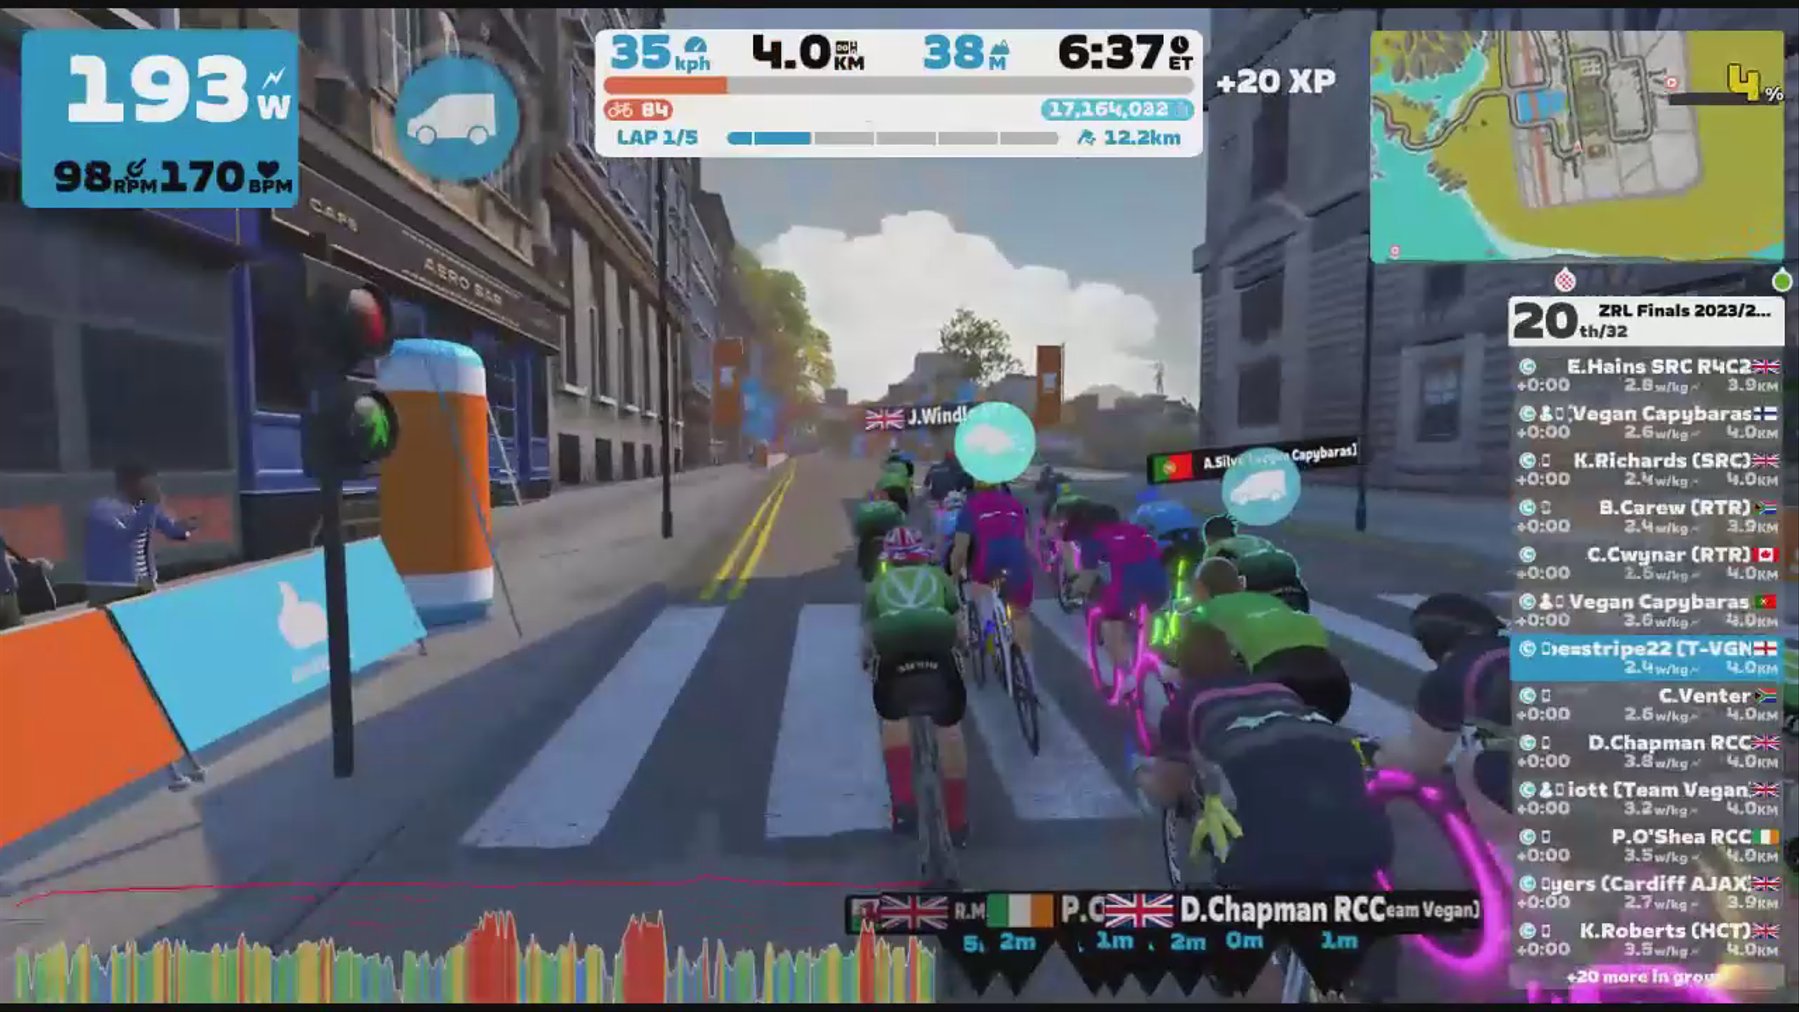 Zwift - Race: ZRL Finals 2023/24 - Open EMEAW Division 2 - Plate Final (Part2) (C) on Glasgow Reverse in Scotland